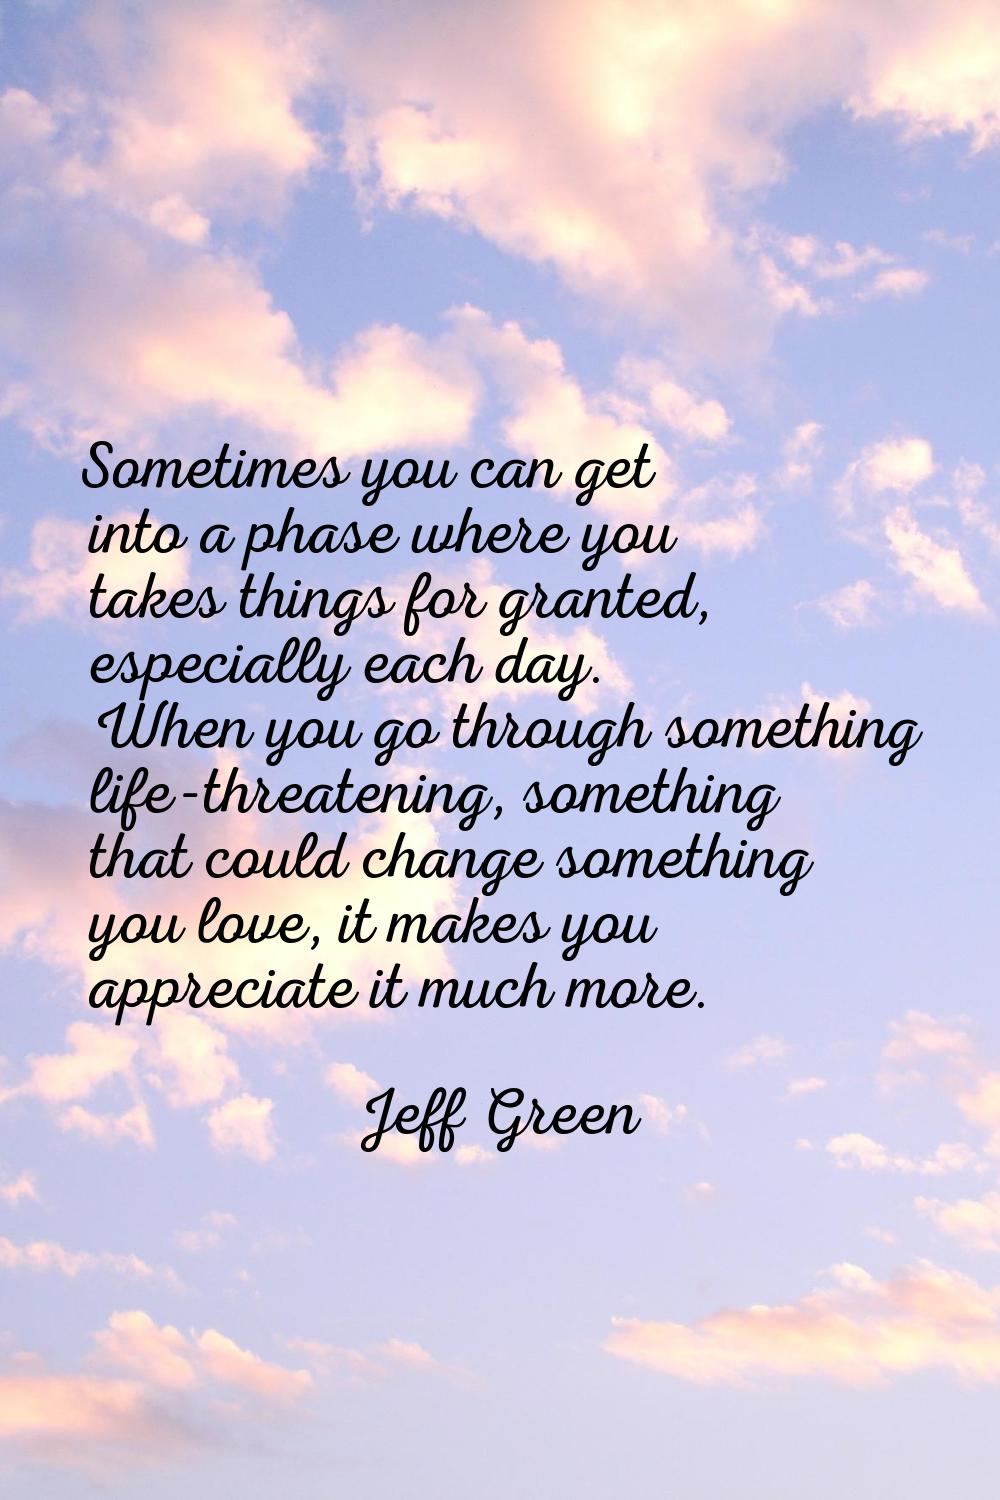 Sometimes you can get into a phase where you takes things for granted, especially each day. When yo